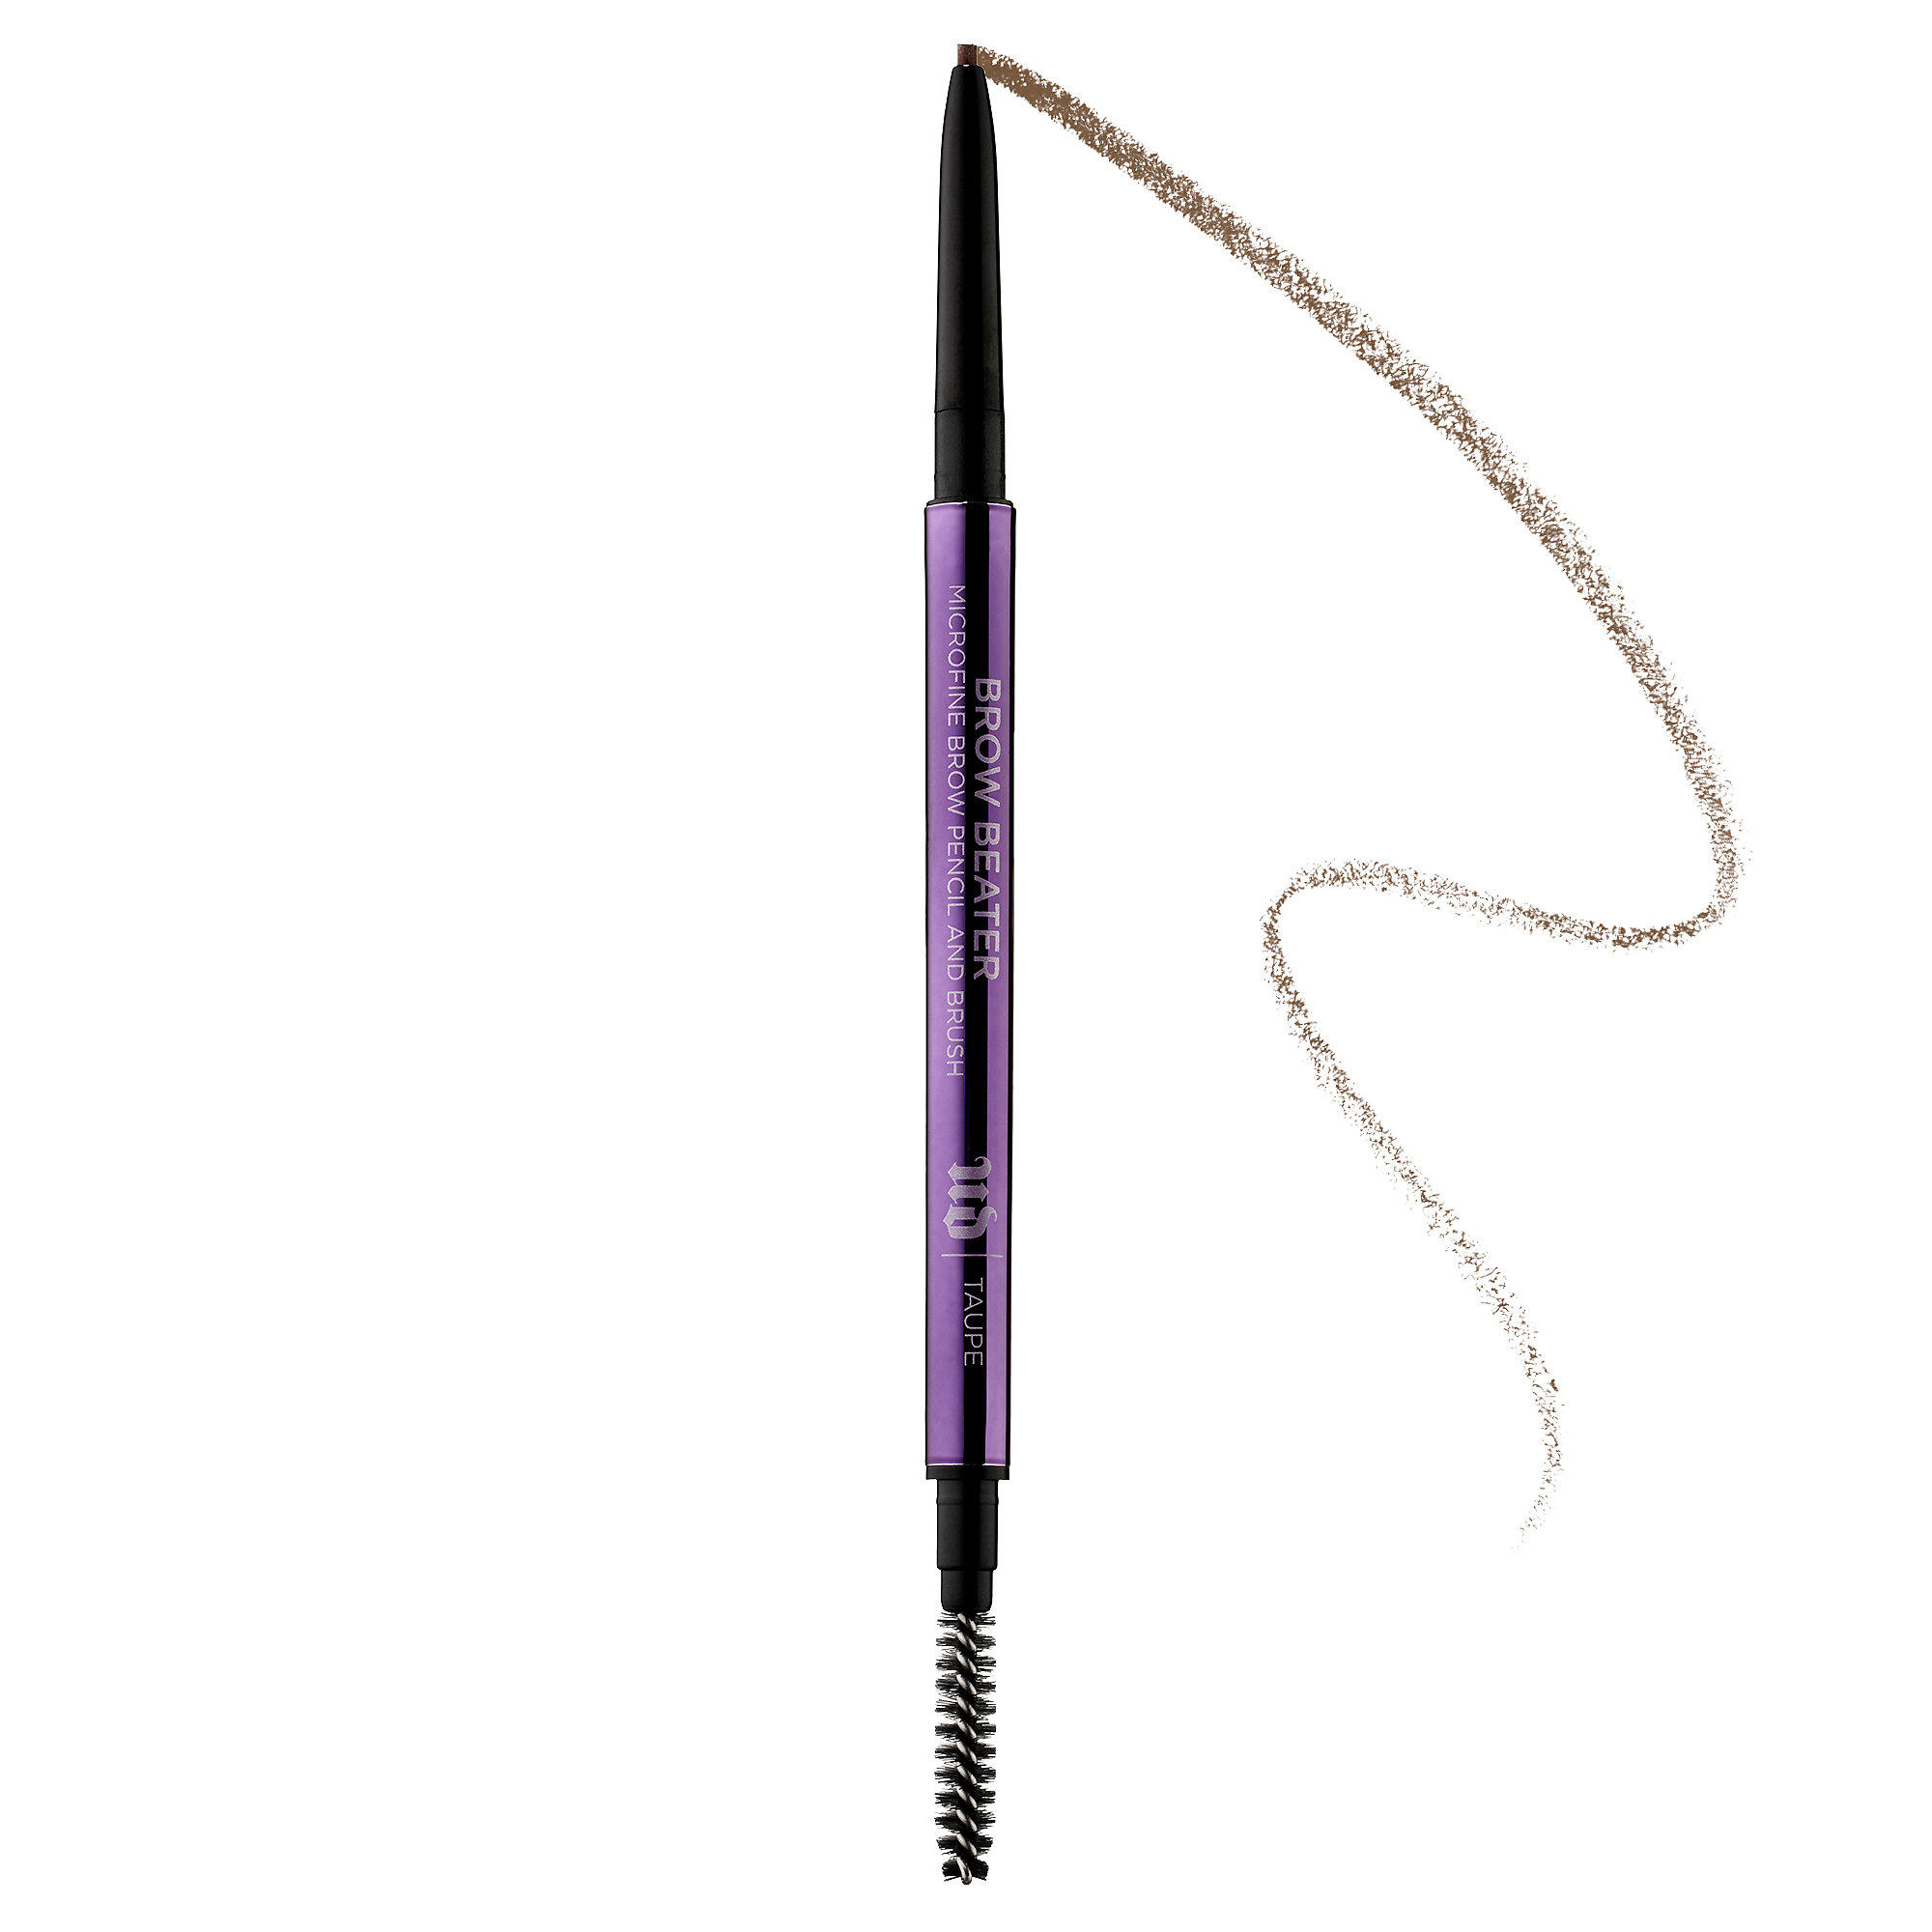 Urban Decay Brow Beater Microfine Brow Pencil and Brush